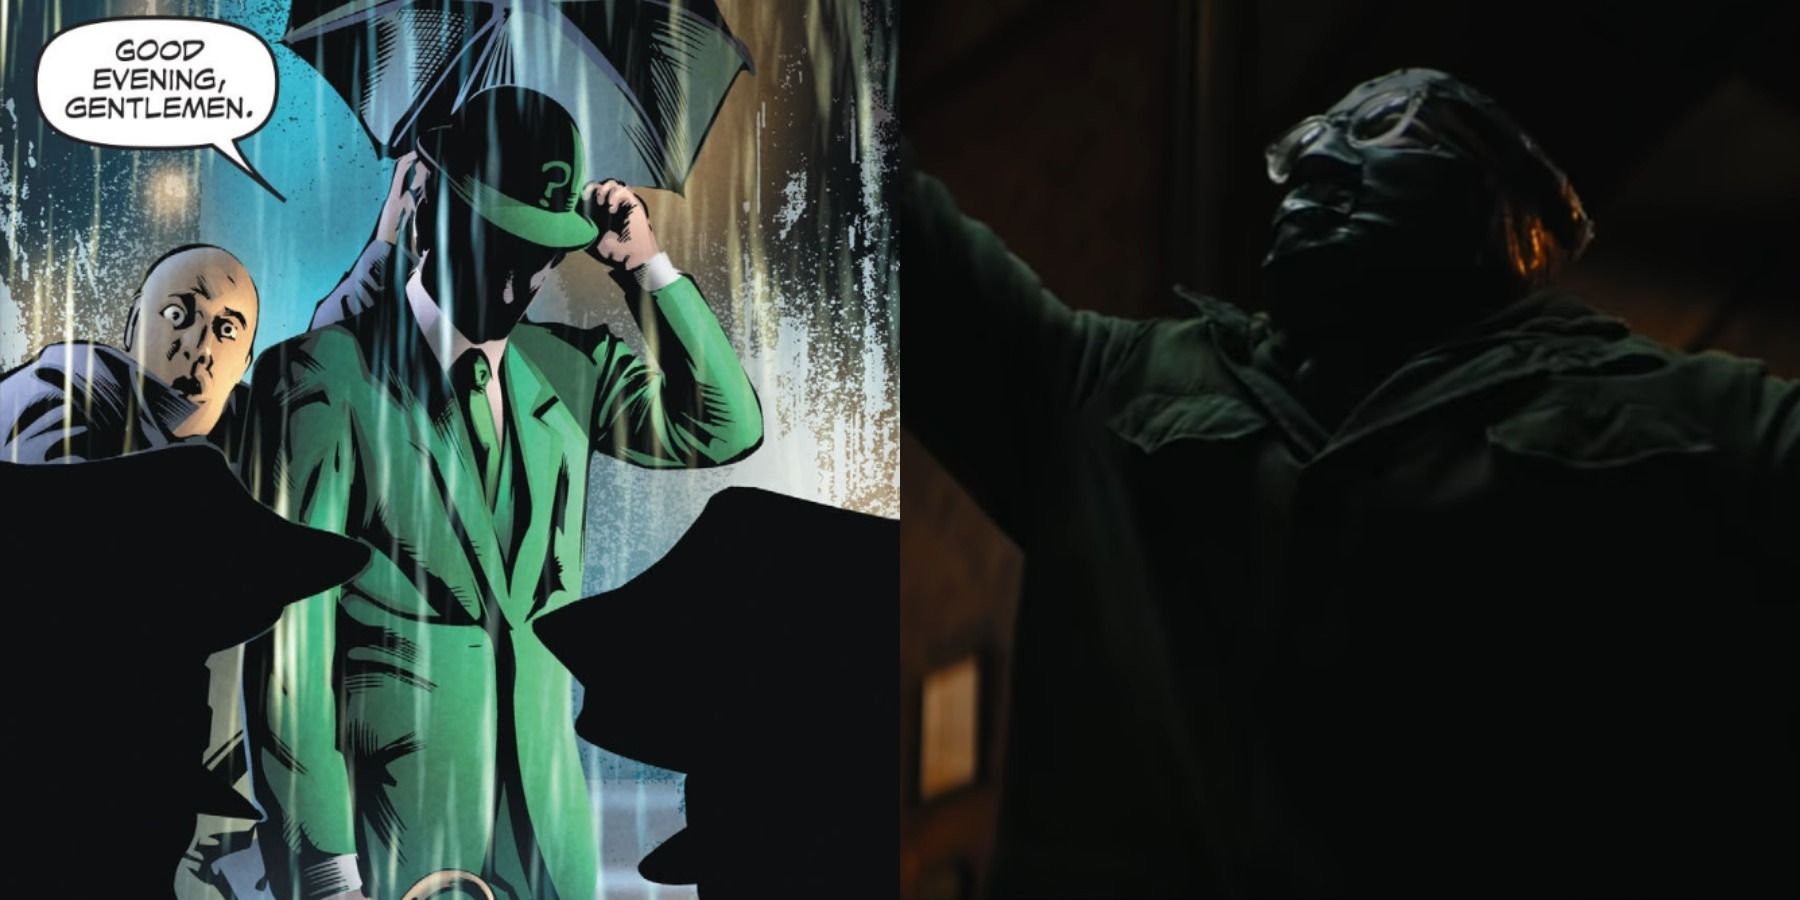 Split image of the Riddler greeting GCPD officers in Batman Arkham - The Riddler and The Riddler using duct tape on a victim in The Batman 2022